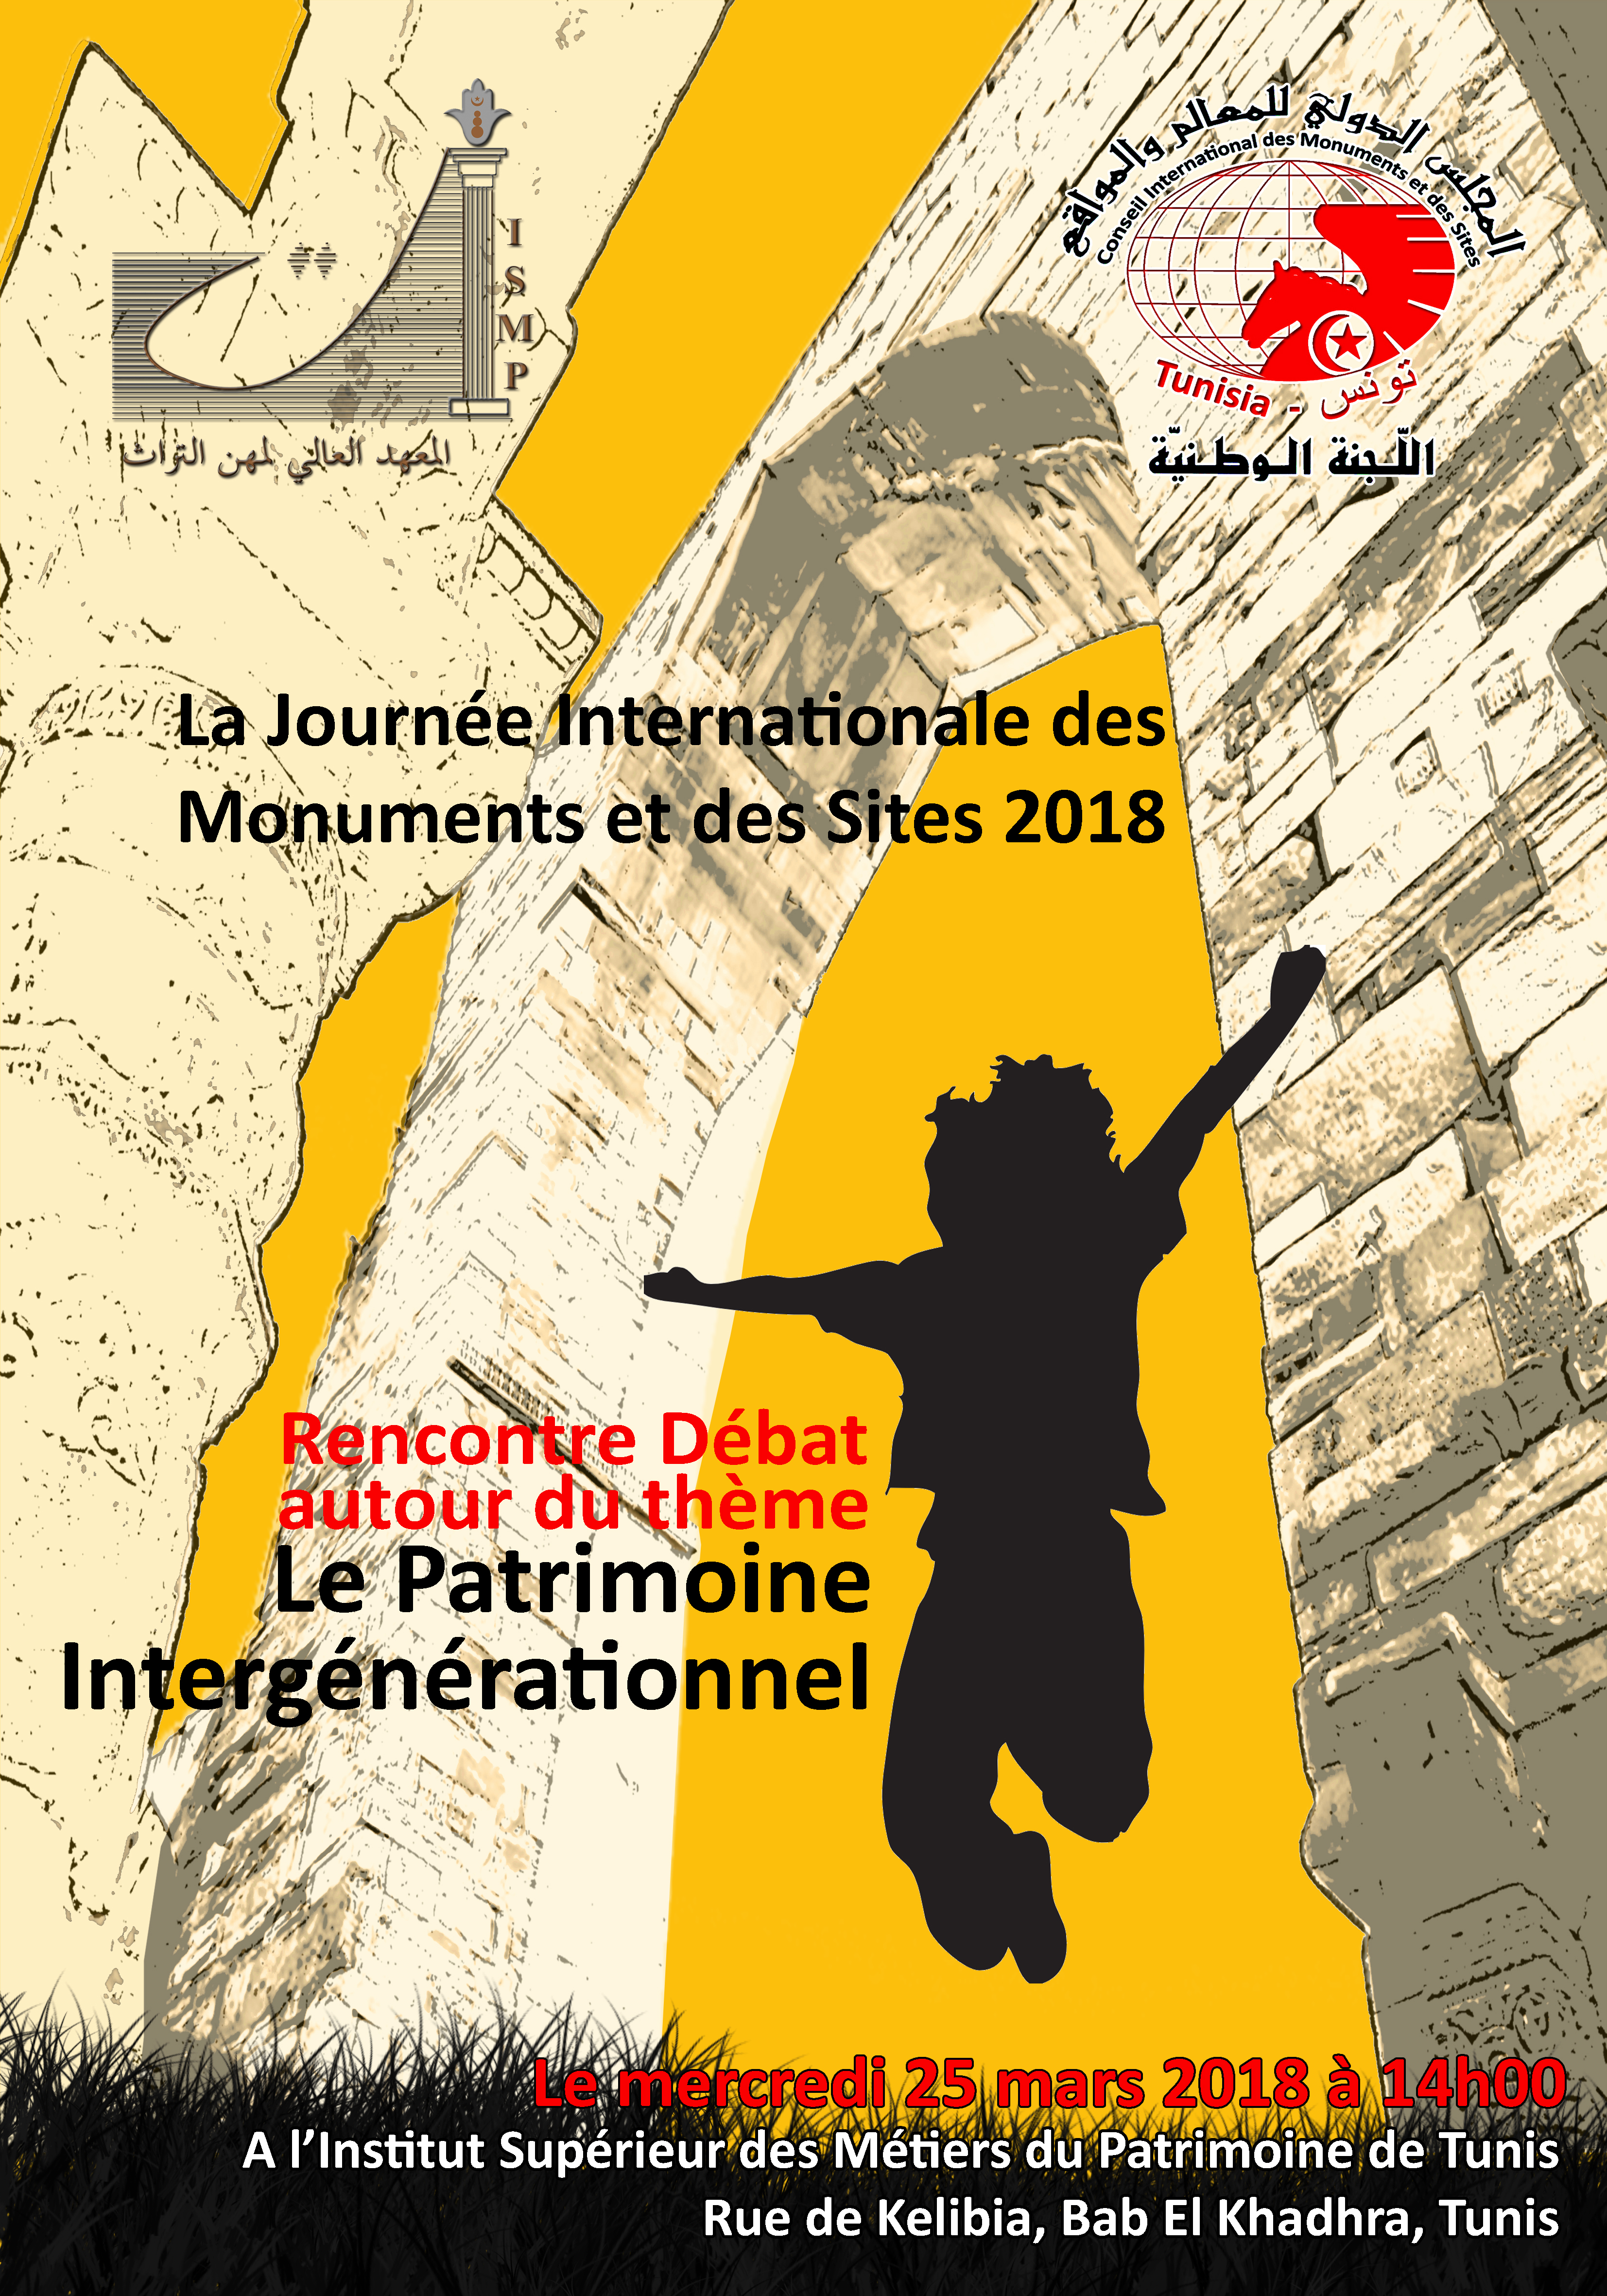 18 April 2018 Events International Council On Monuments And Sites Images, Photos, Reviews